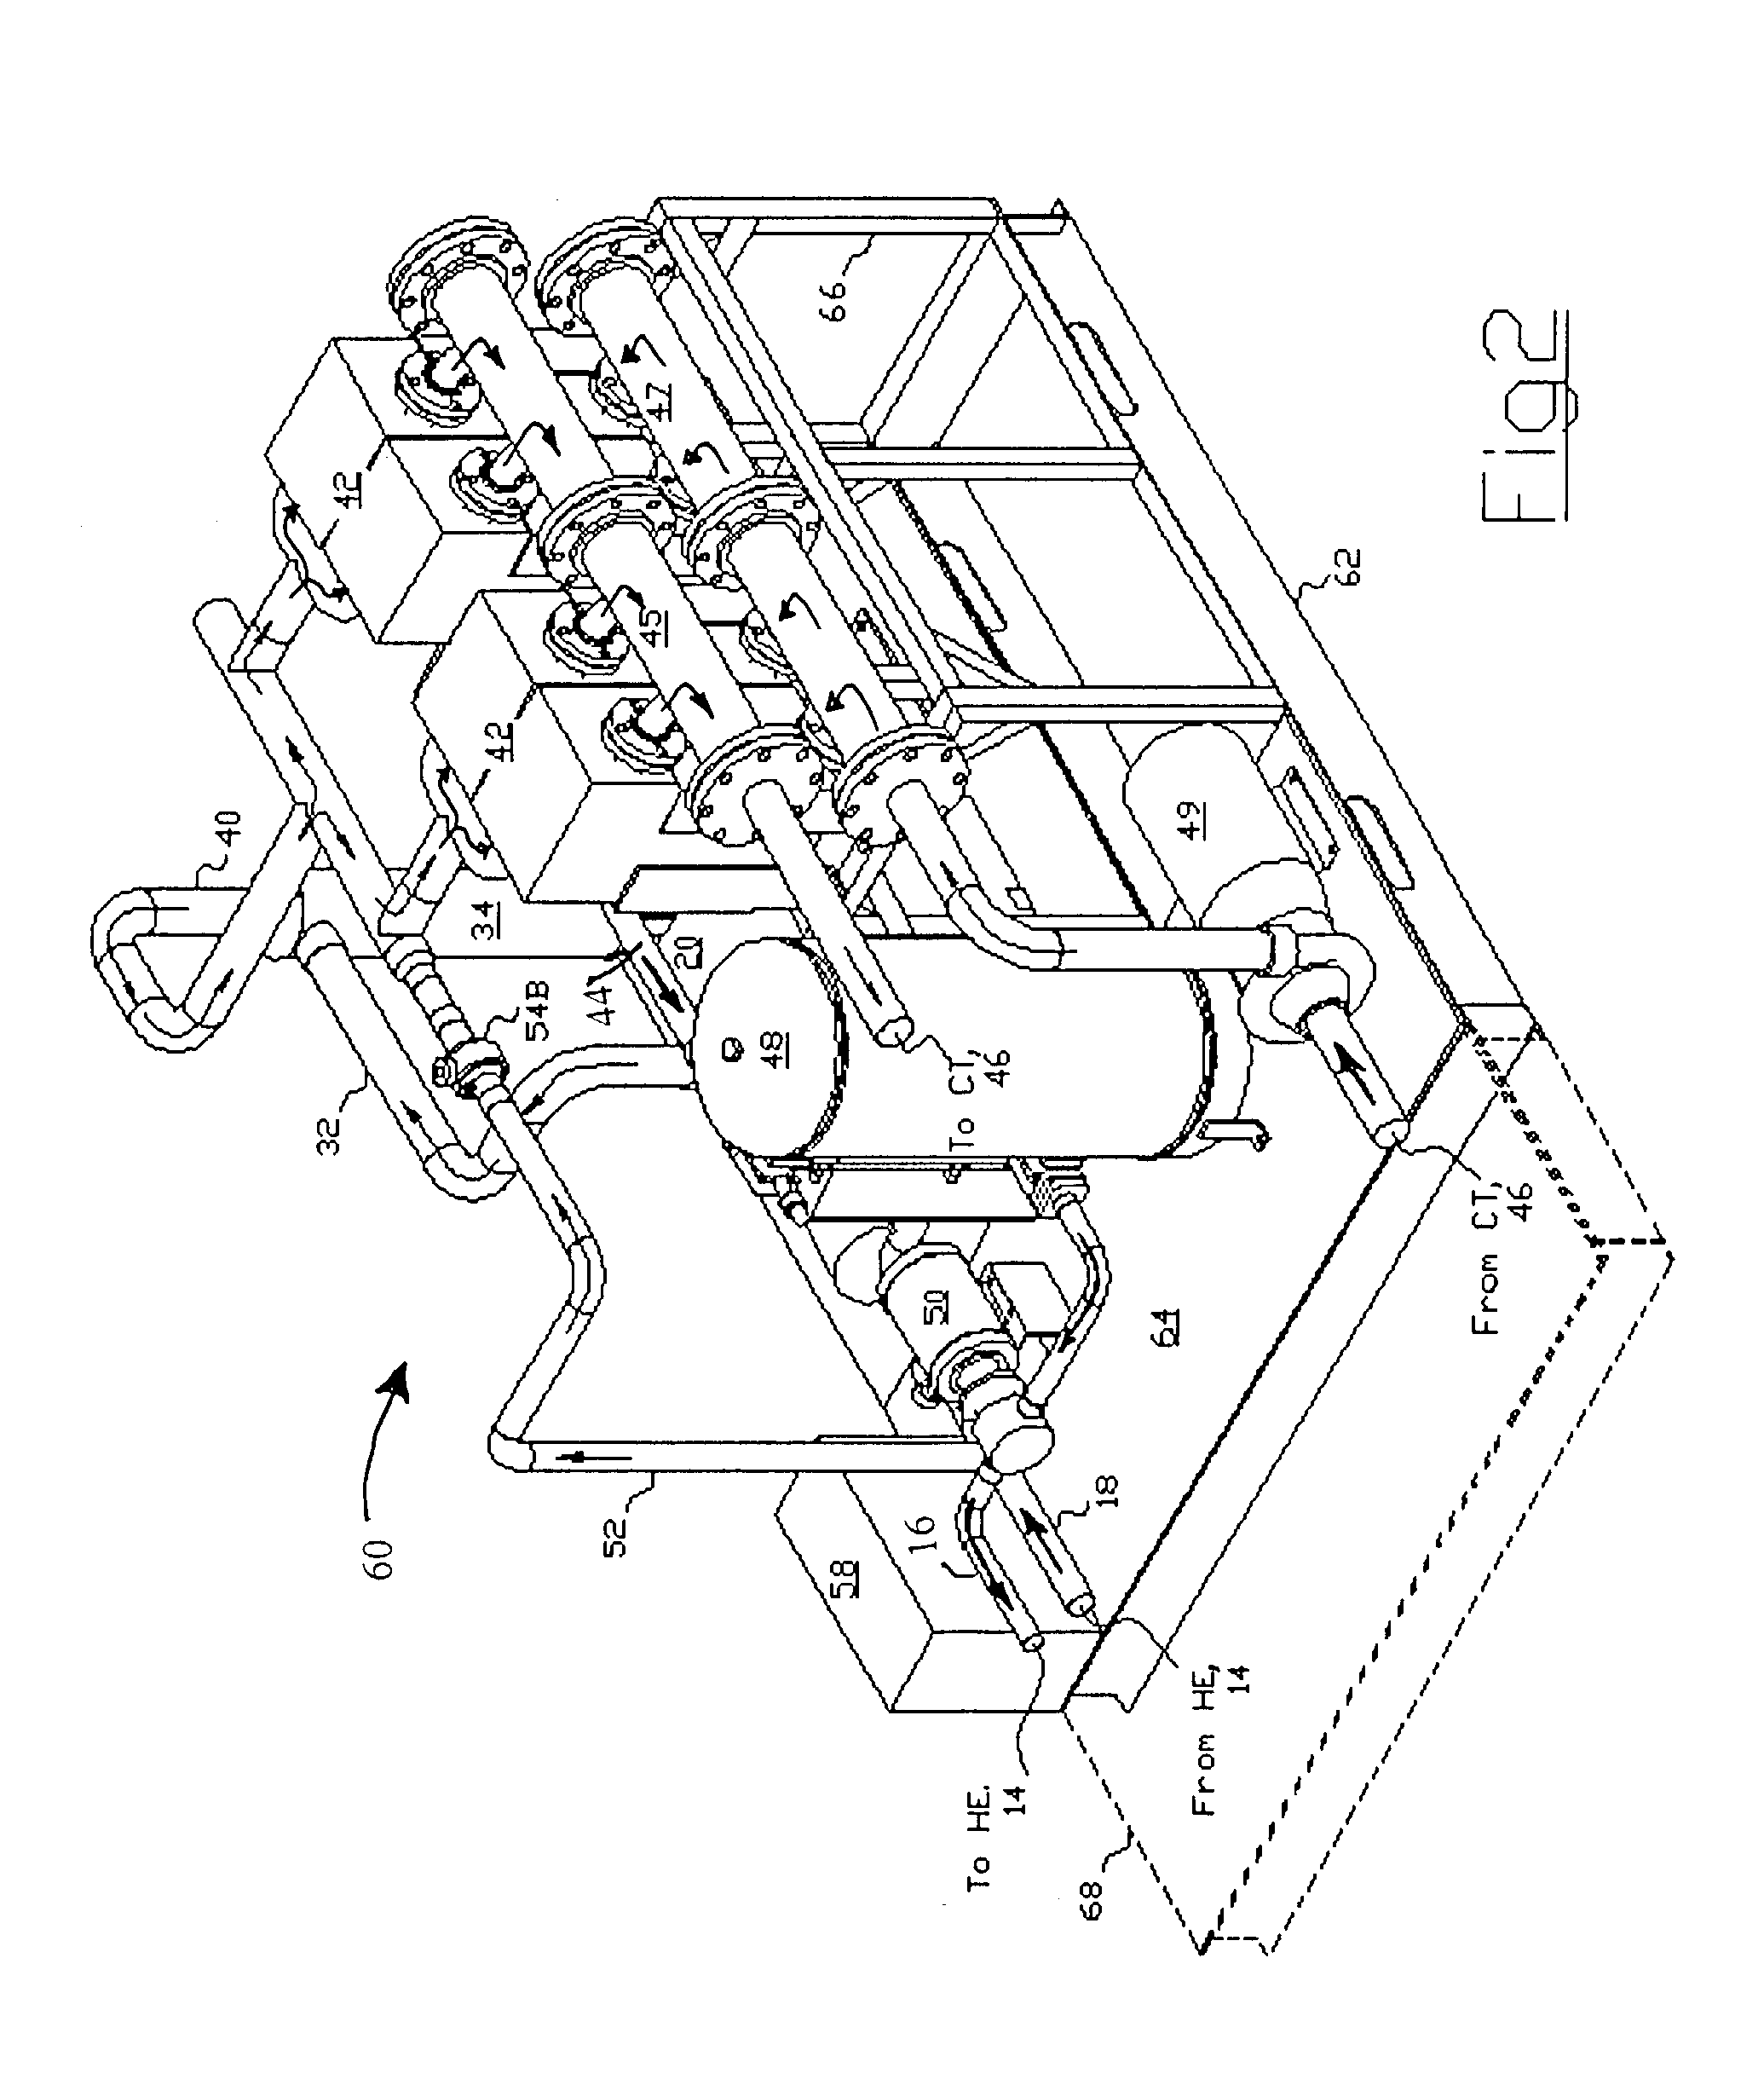 System and method for generation of electricity and power from waste heat and solar sources